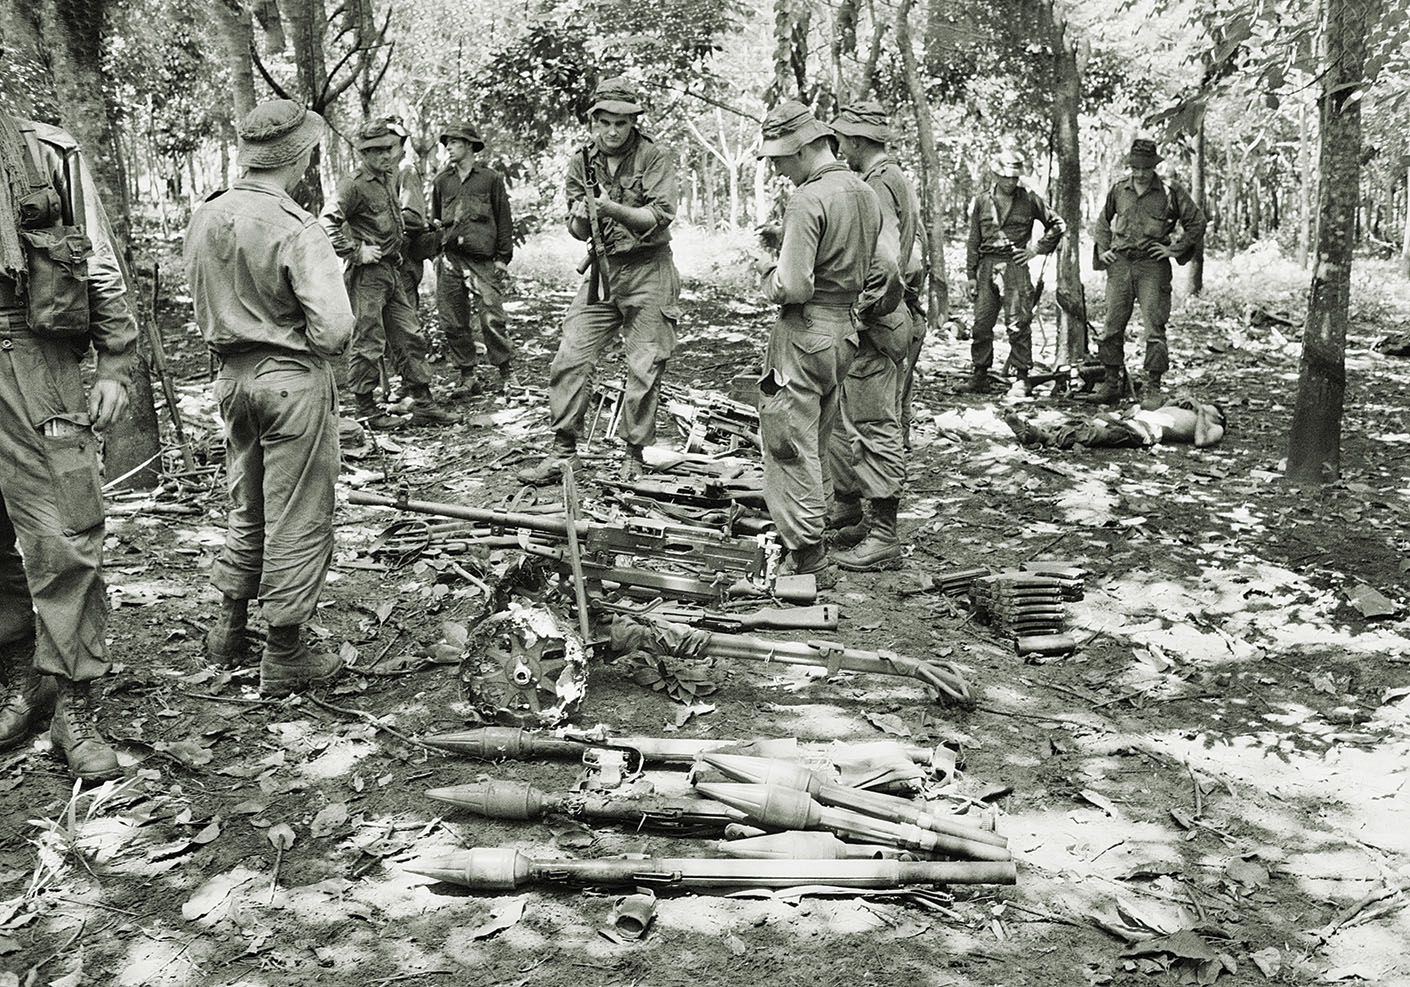 After the battle, troops in the rubber plantation examine Viet Cong weapons, including rocket launchers, heavy machine guns and recoilless rifles. / Australian War Memorial